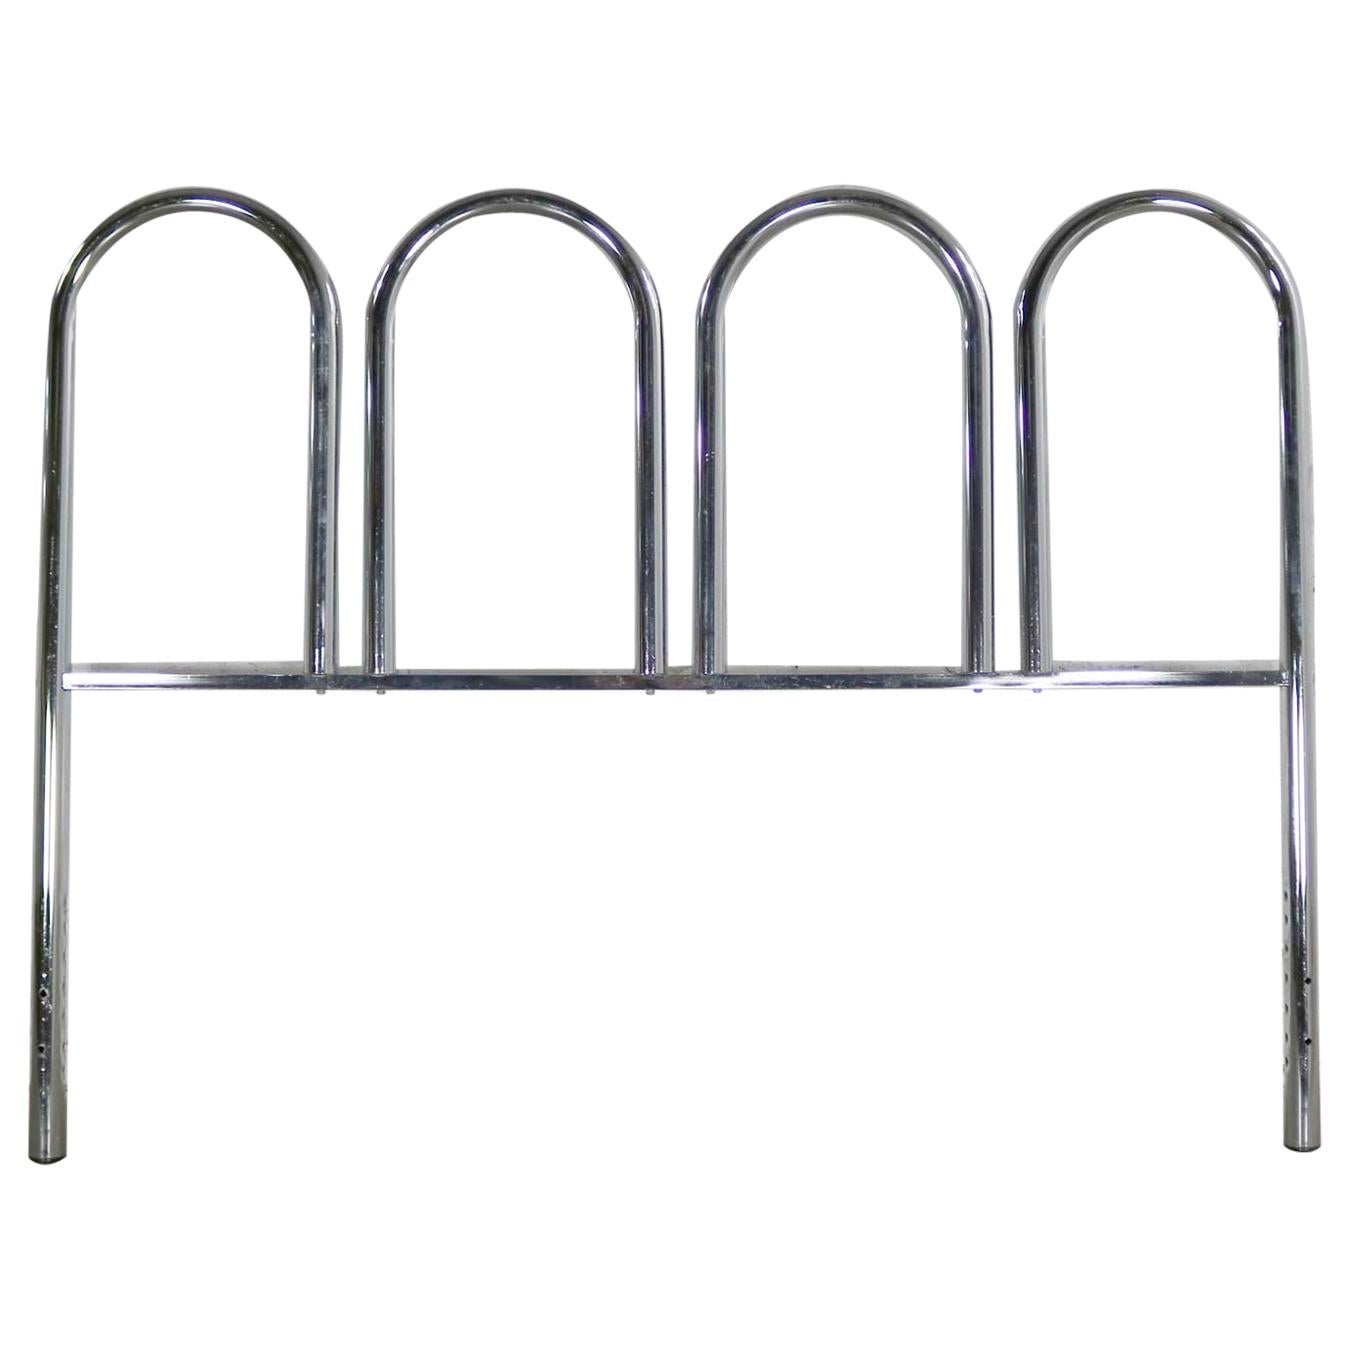 Vintage Mid-Century Modern to Modern Chrome Tube Headboard Four Arch Full-Size  For Sale